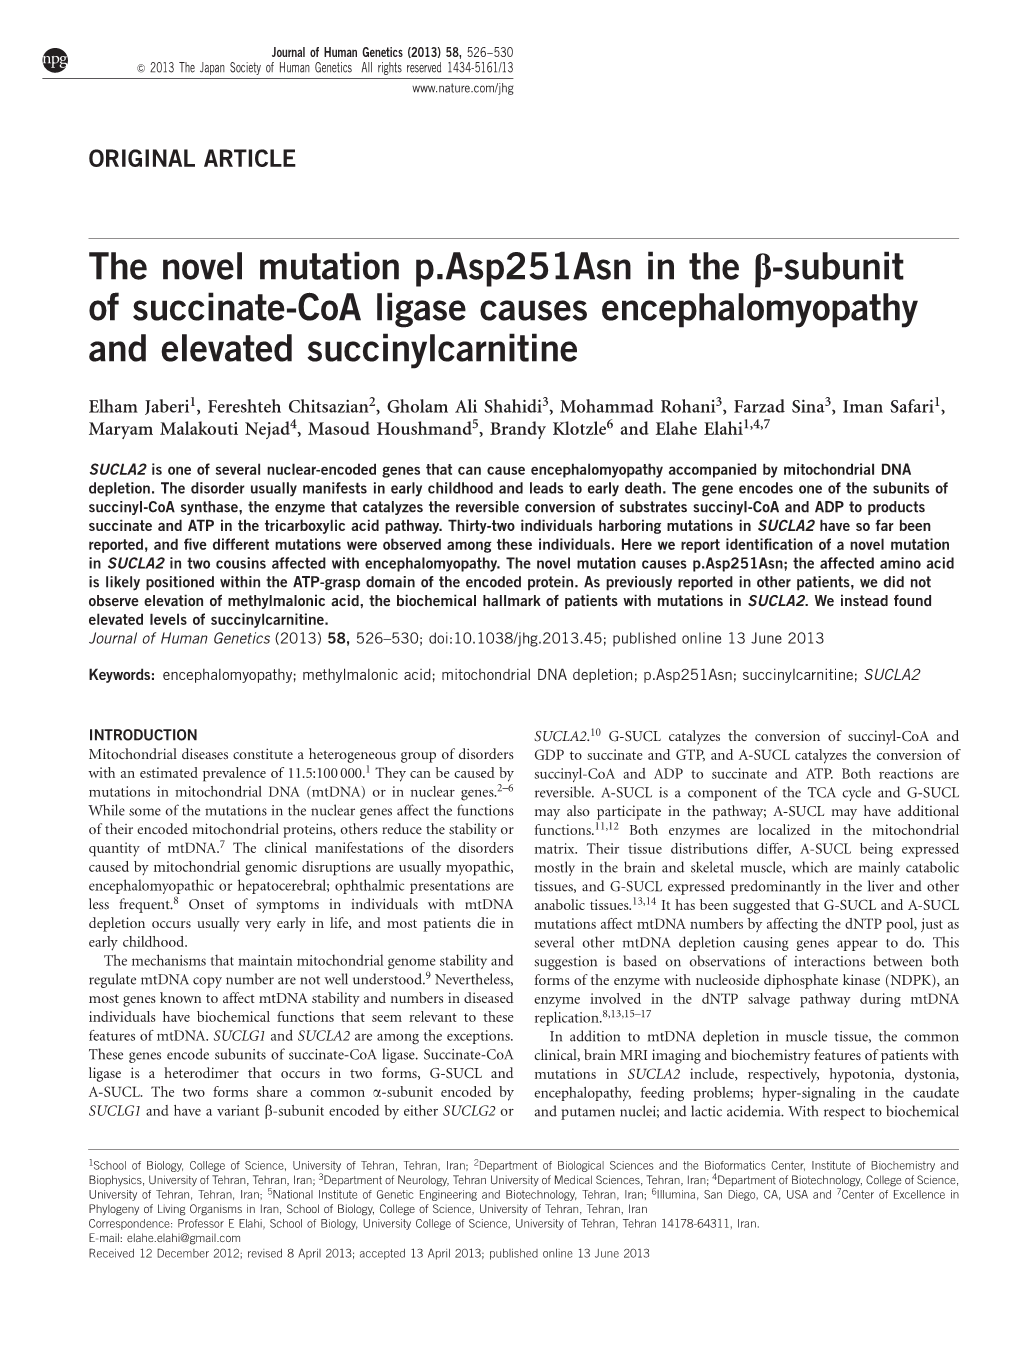 Subunit of Succinate-Coa Ligase Causes Encephalomyopathy and Elevated Succinylcarnitine